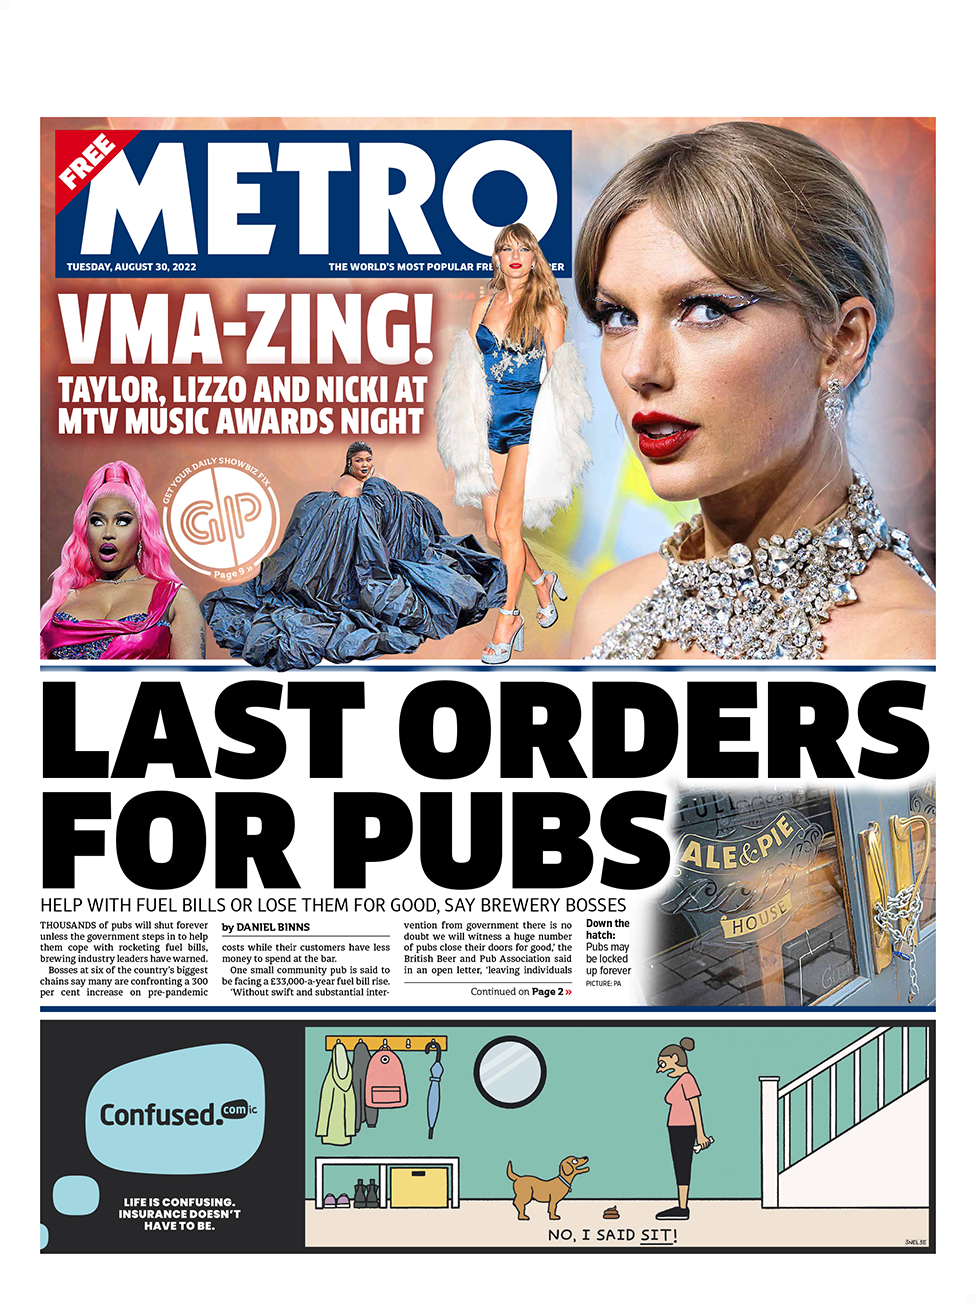 The headline in the Metro reads 'Last orders for pubs'